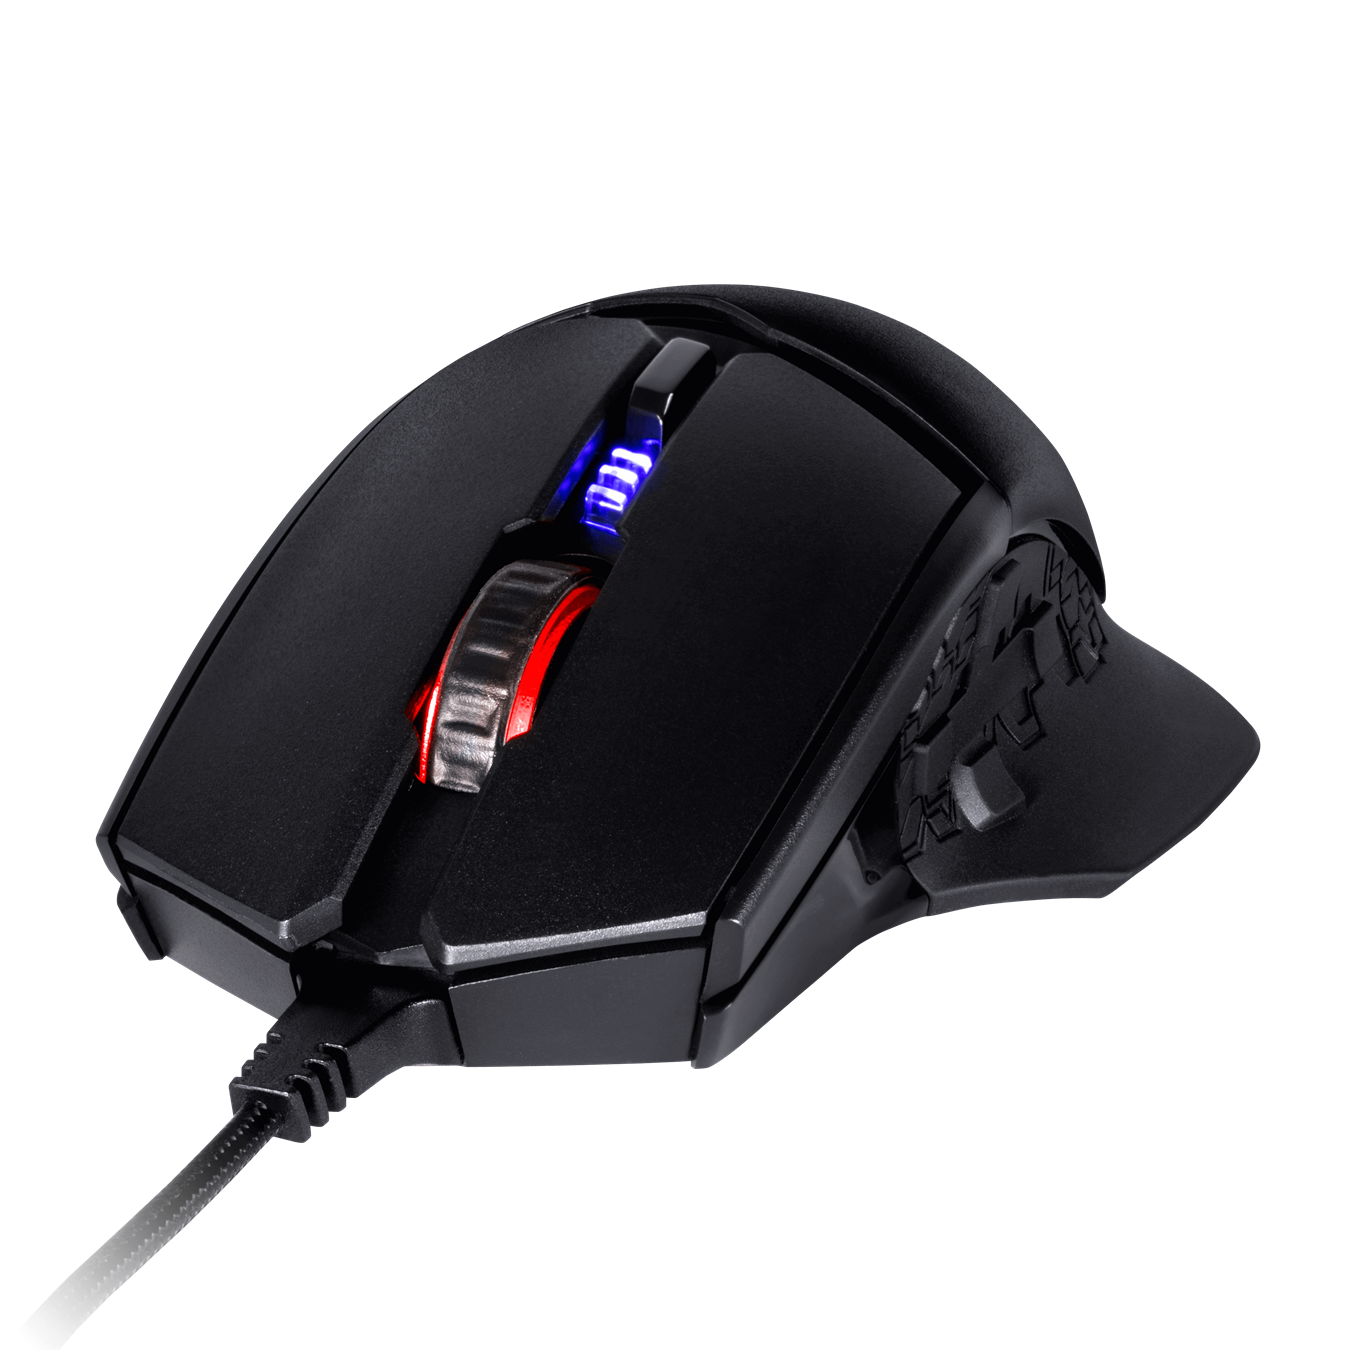 MM830 Gaming Mouse - Give your victories some flashy good looks with 4-zone RGB illumination